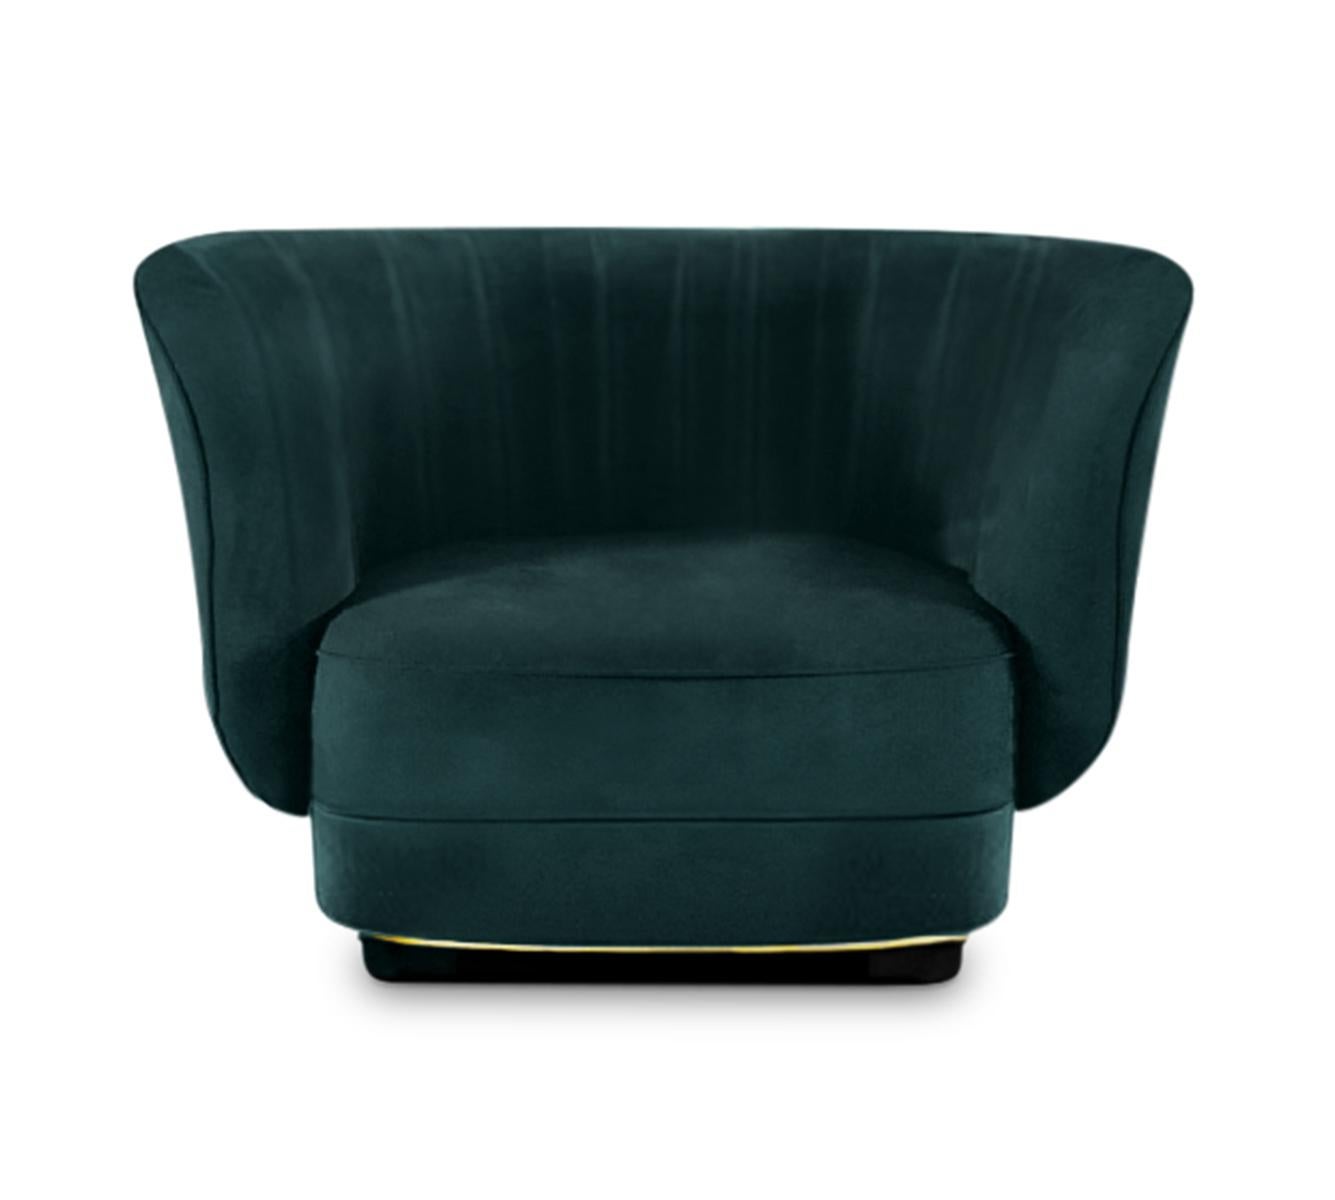 With distinctive branches, elk kelp is a species of algae known for its fascinating beauty. Just like ELK Armchair & its exceptional chair design. Upholstered in cotton velvet and with a base in glossy aged brass & black glossy lacquered, this